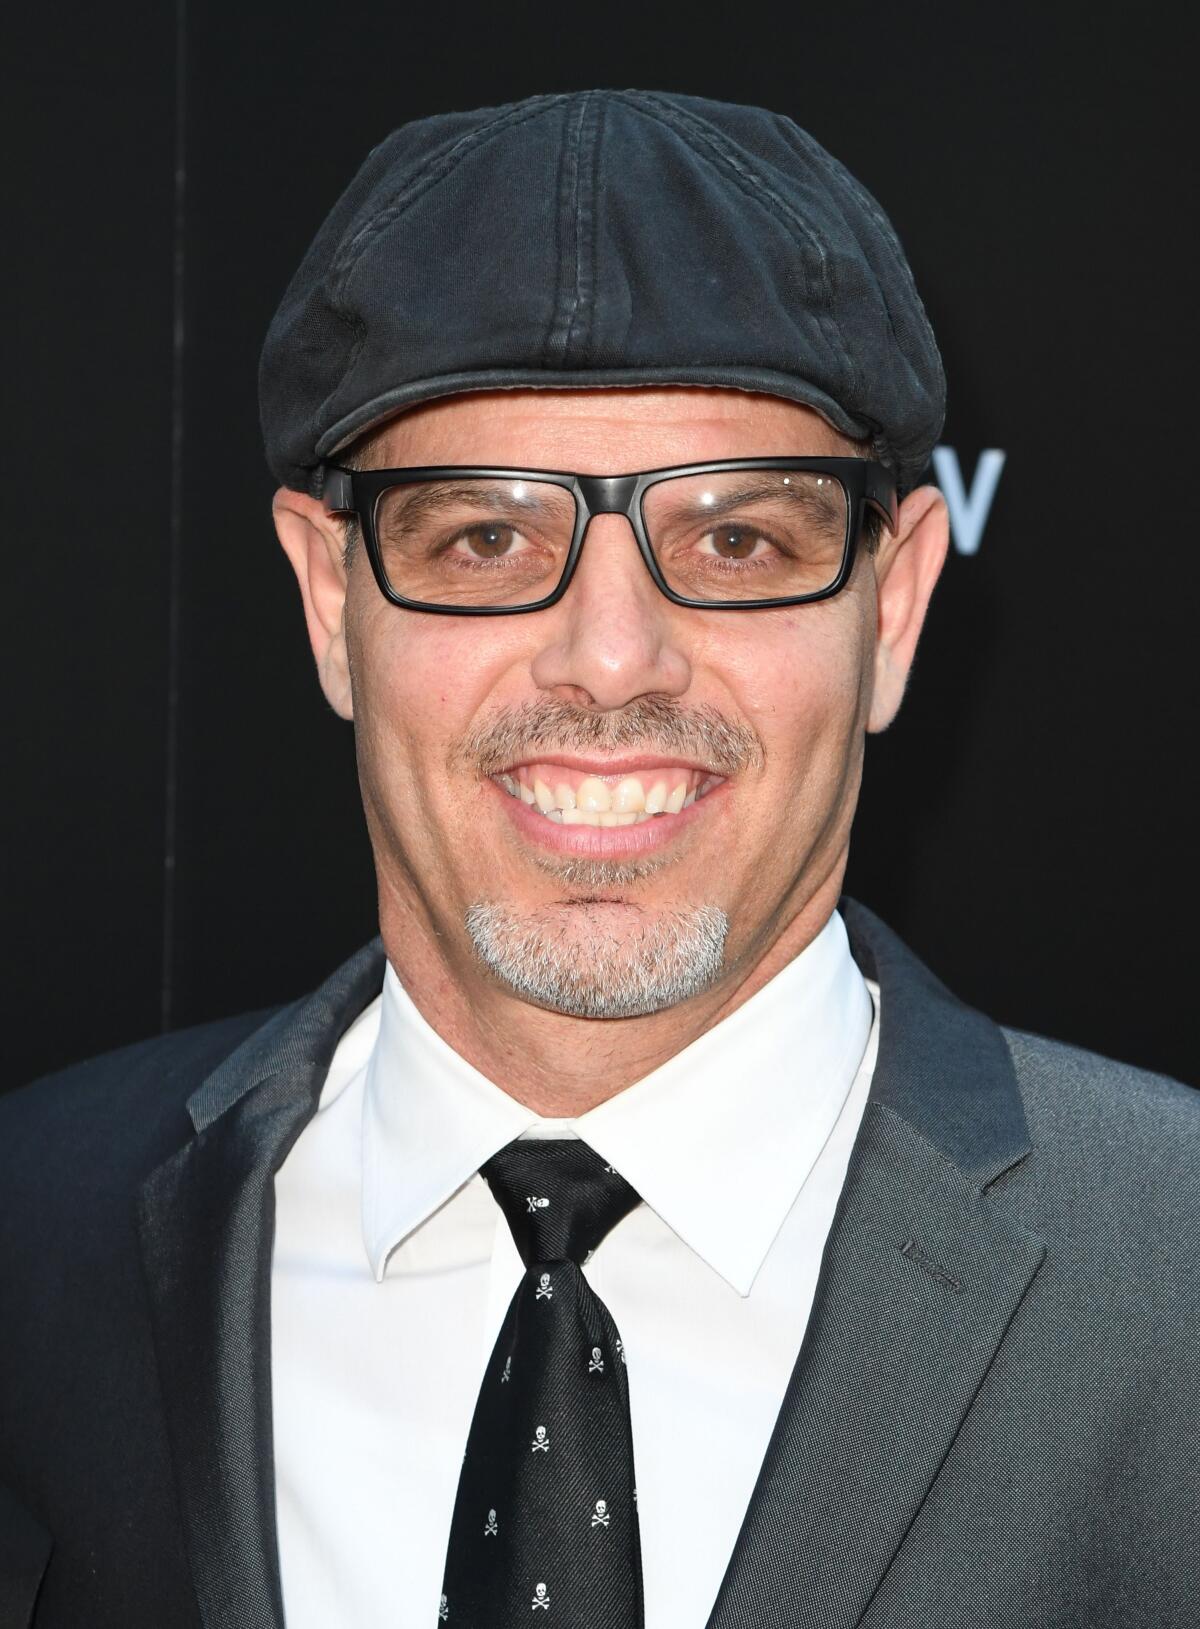 A smiling man with a graying goatee wears a suit, tie,  cap and black glasses.